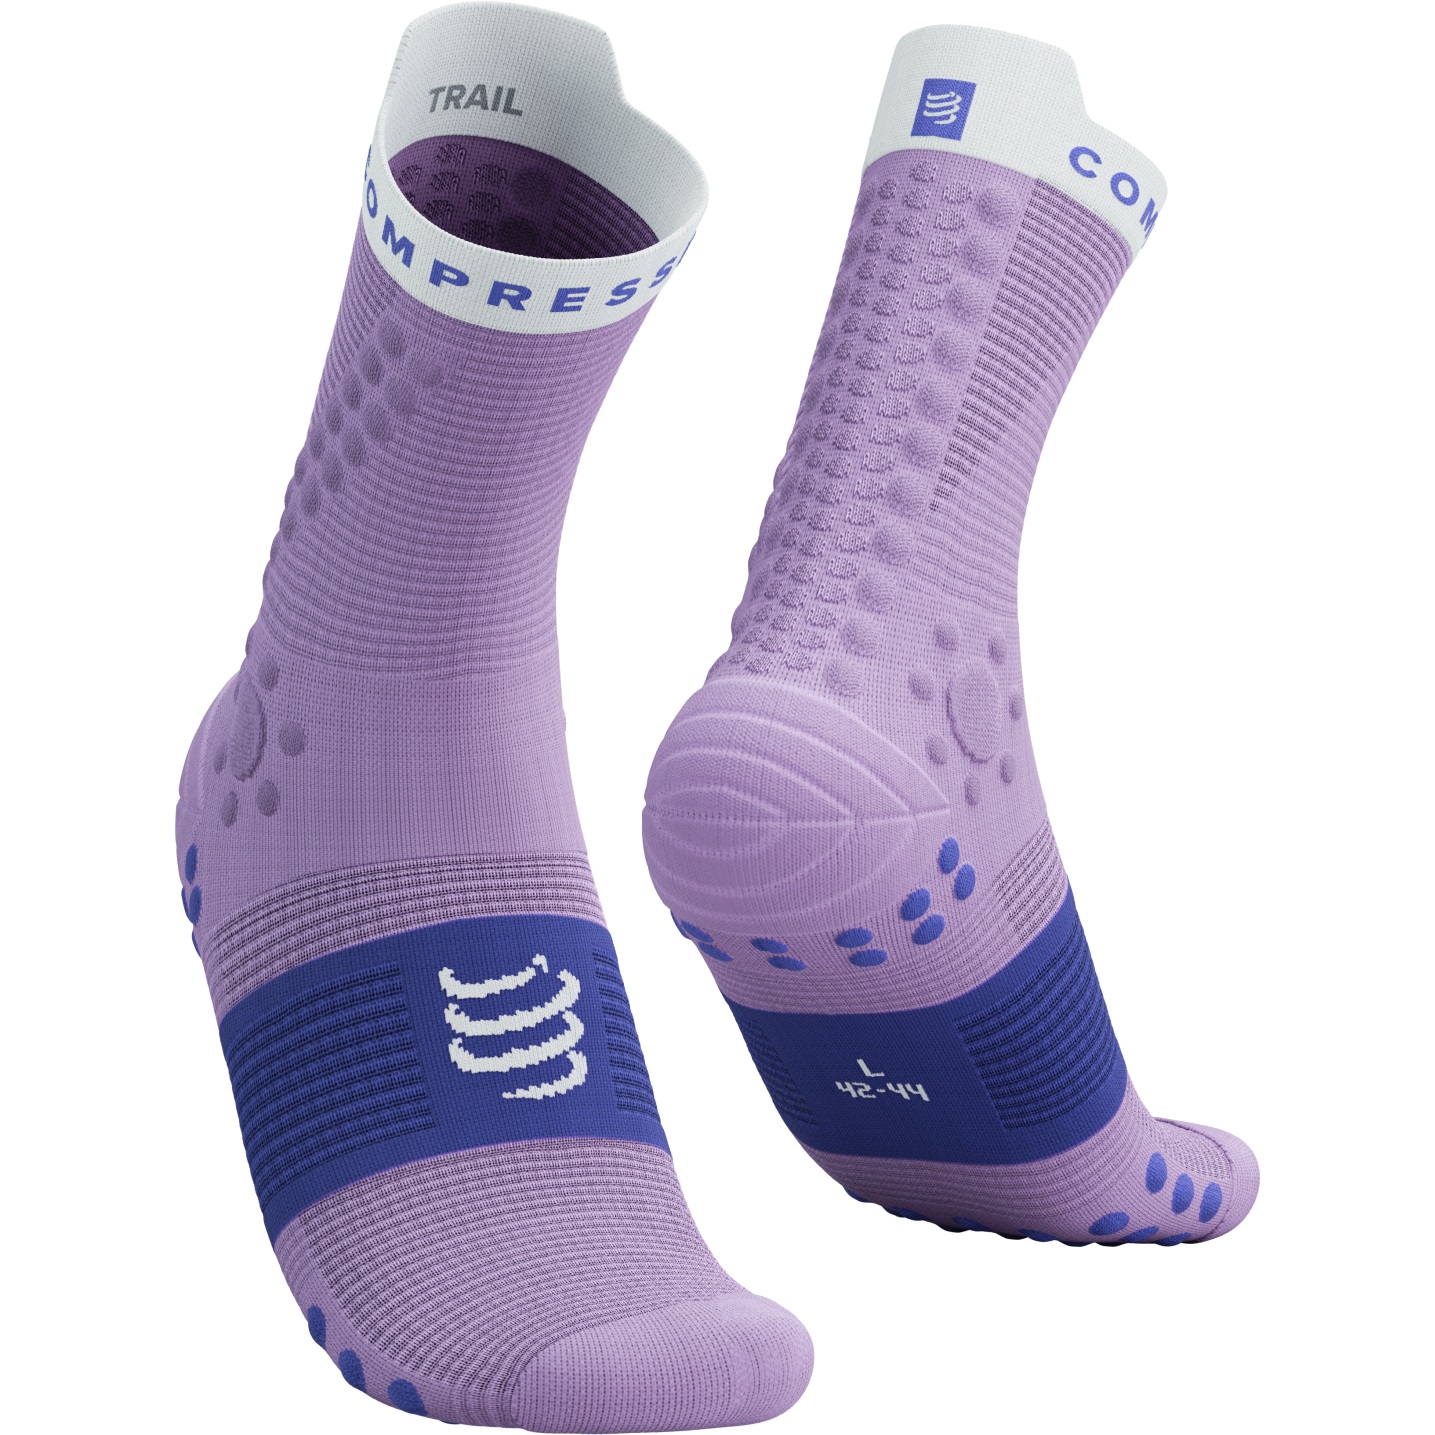 Picture of Compressport Pro Racing Compression Socks v4.0 Trail - lupine/dazzling blue/white